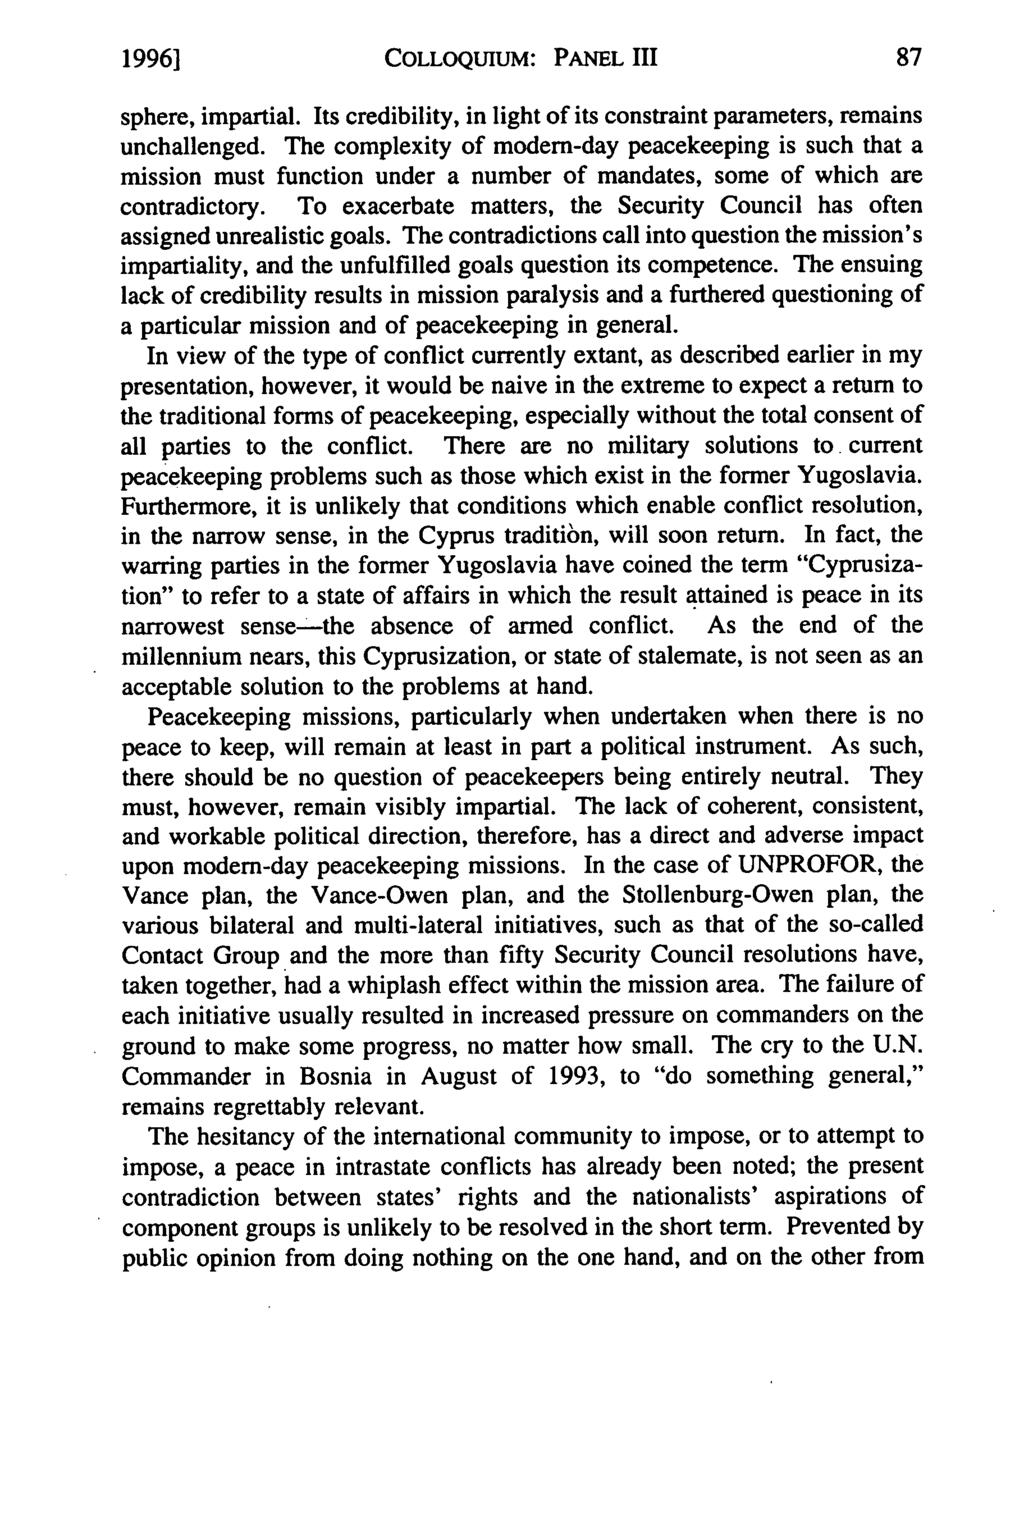 1996] COLLOQUIUM: PANEL III sphere, impartial. Its credibility, in light of its constraint parameters, remains unchallenged.